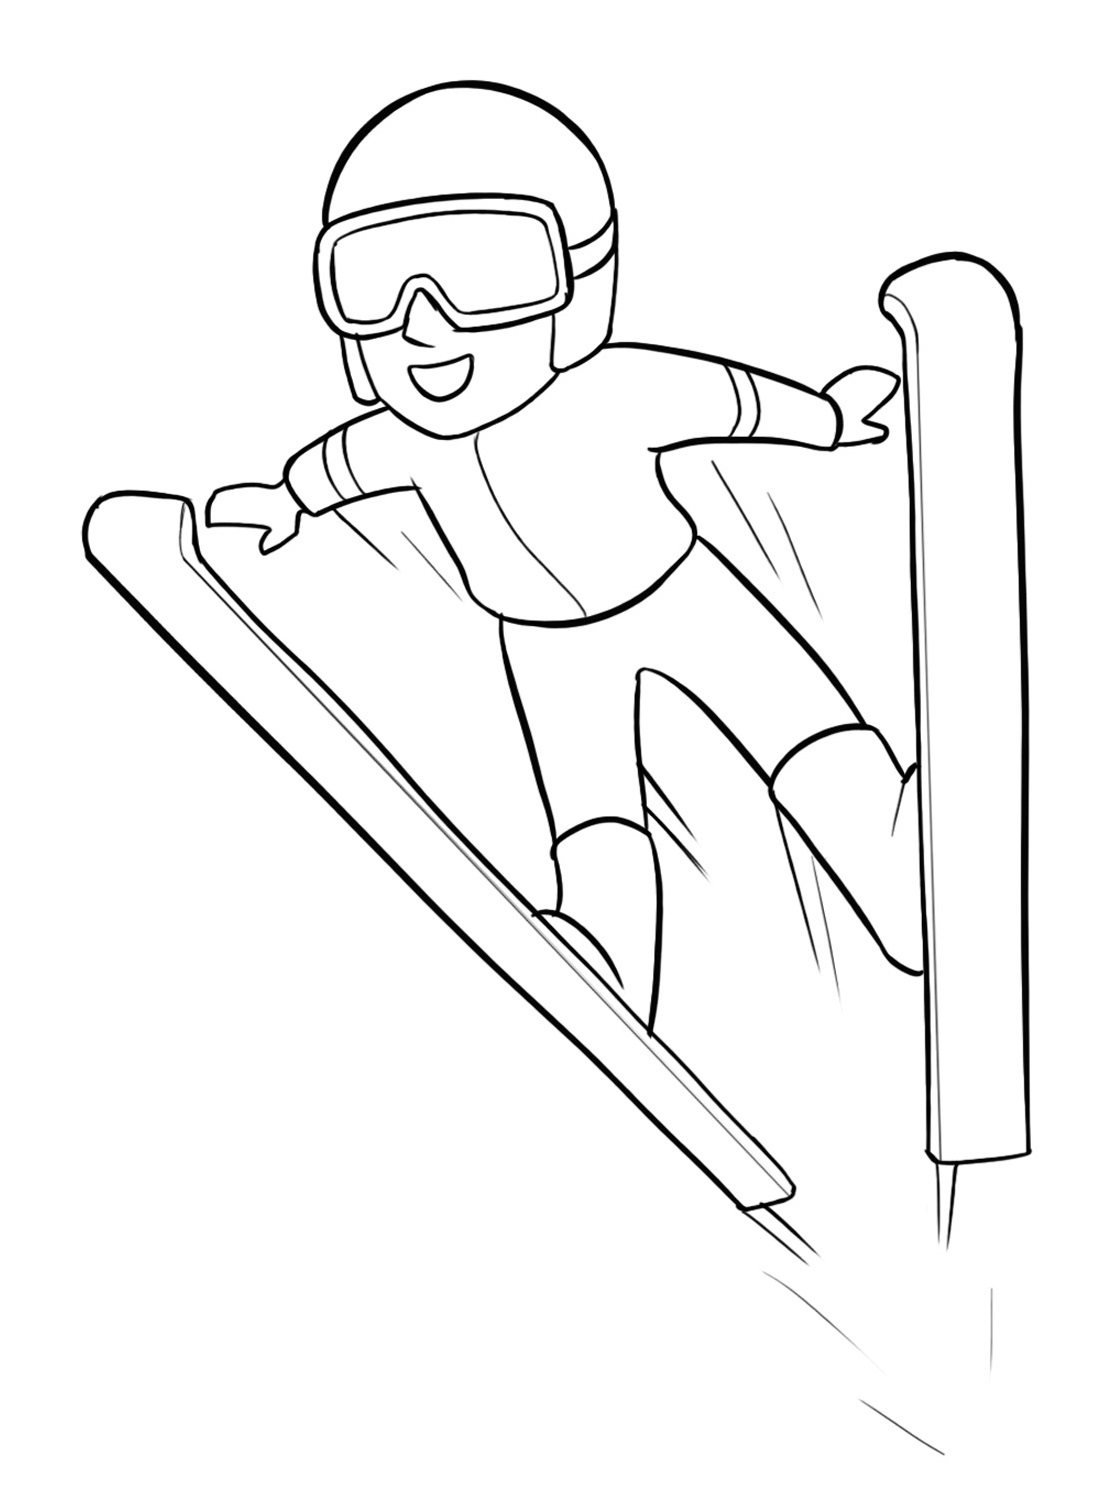 winter ski jumping coloring pages